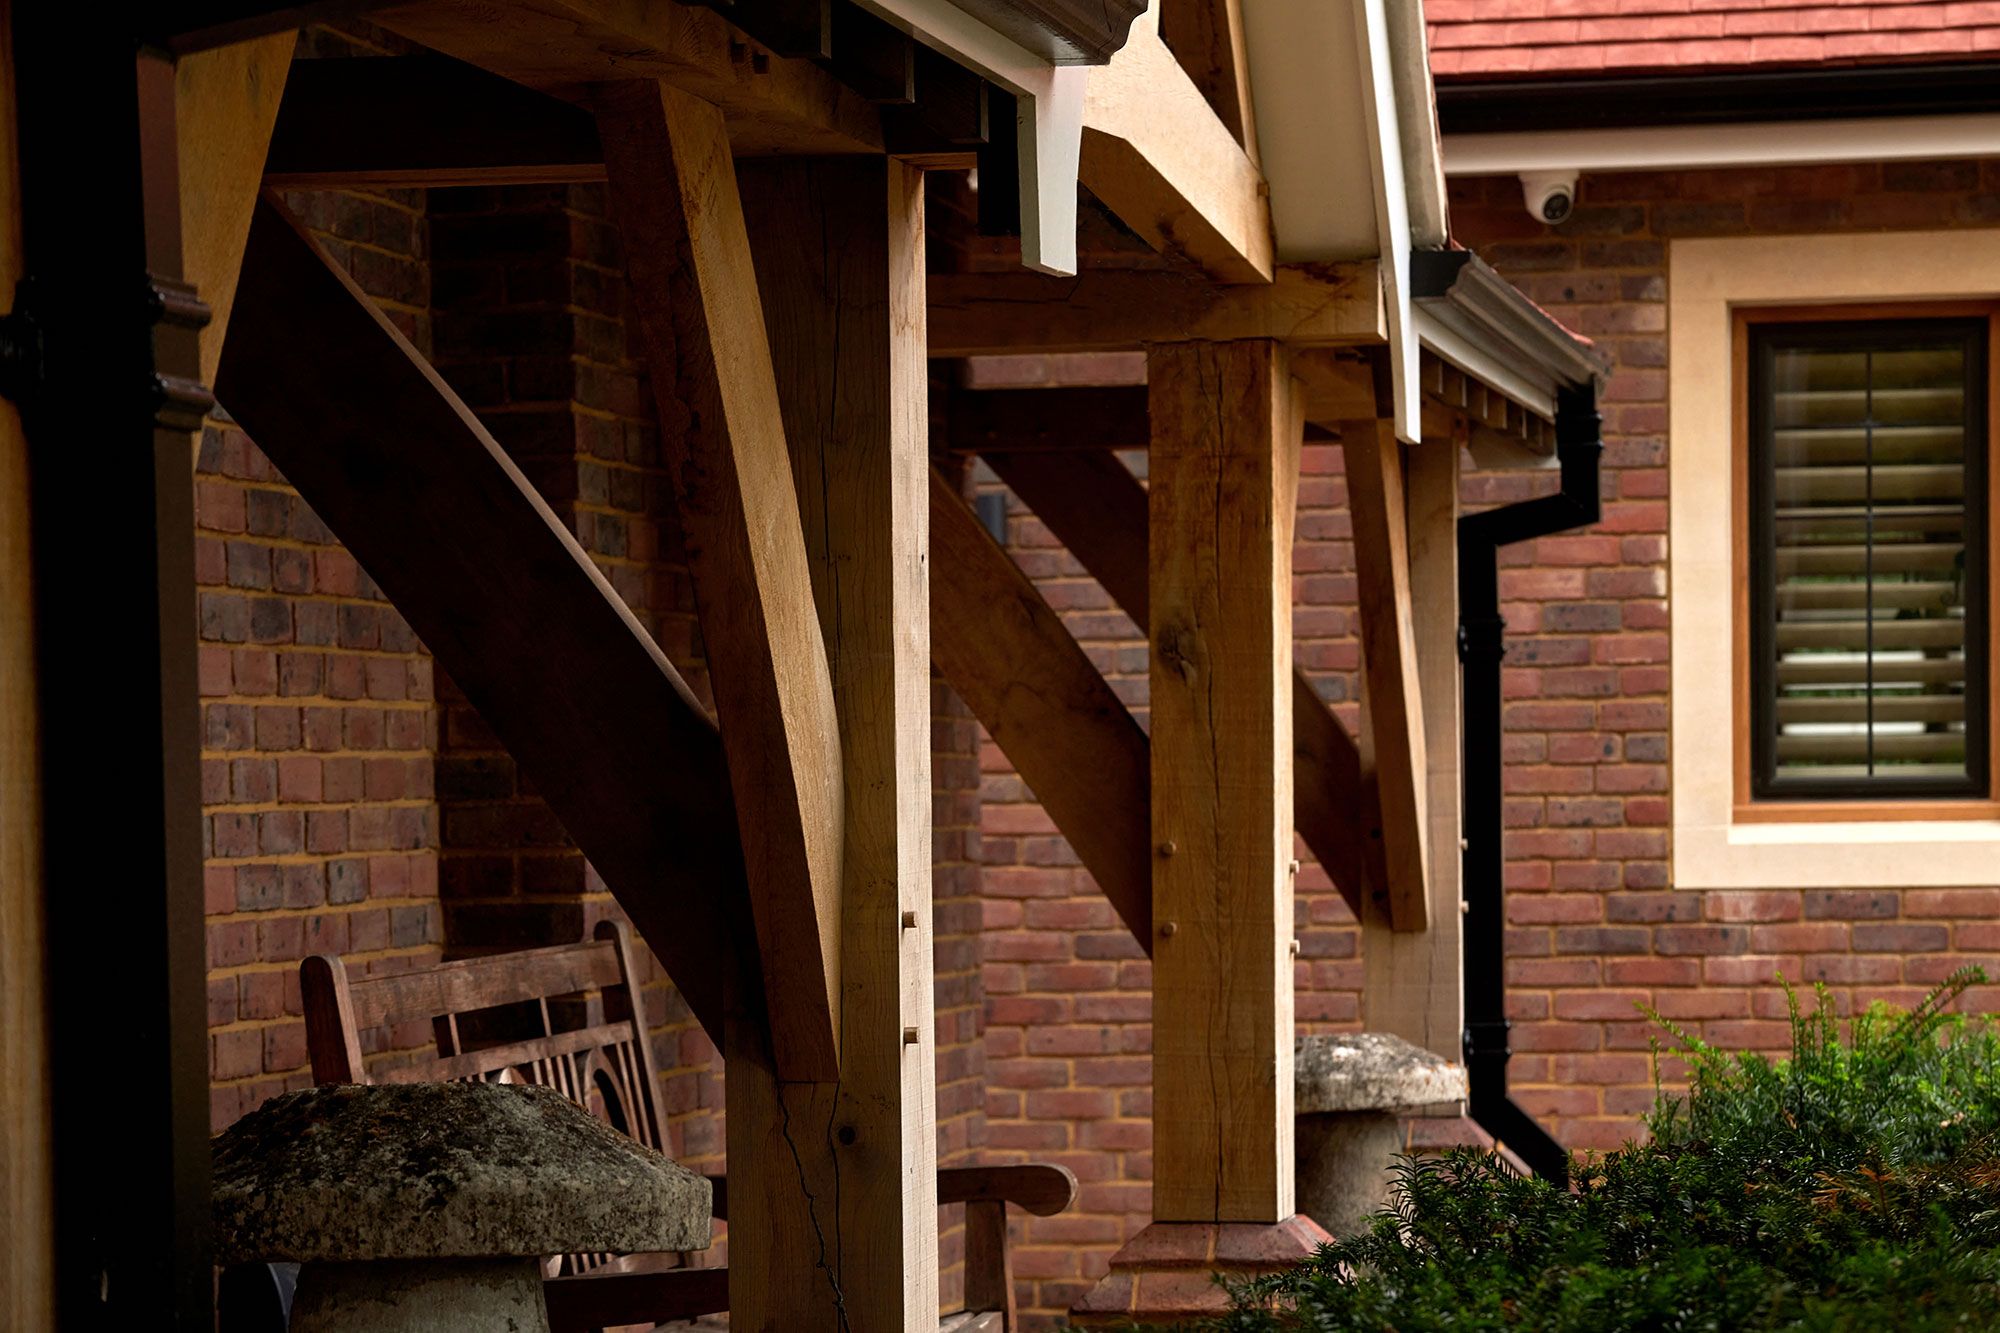 Timberwork detail of Arts and Crafts House - built by KM Grant, Guildford, Surrey.